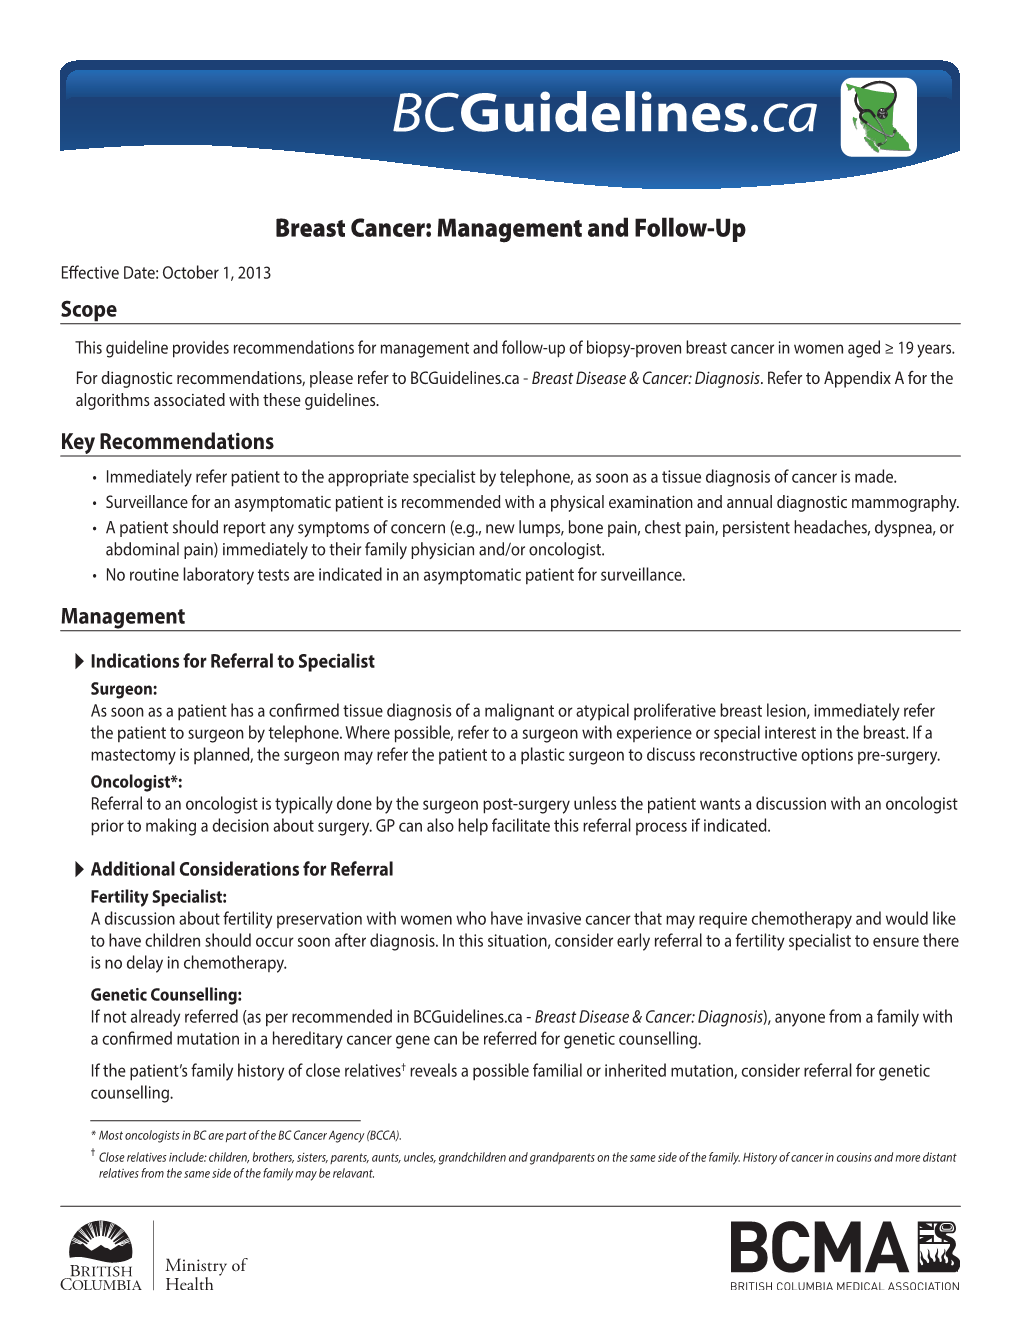 Breast Cancer: Management and Follow-Up